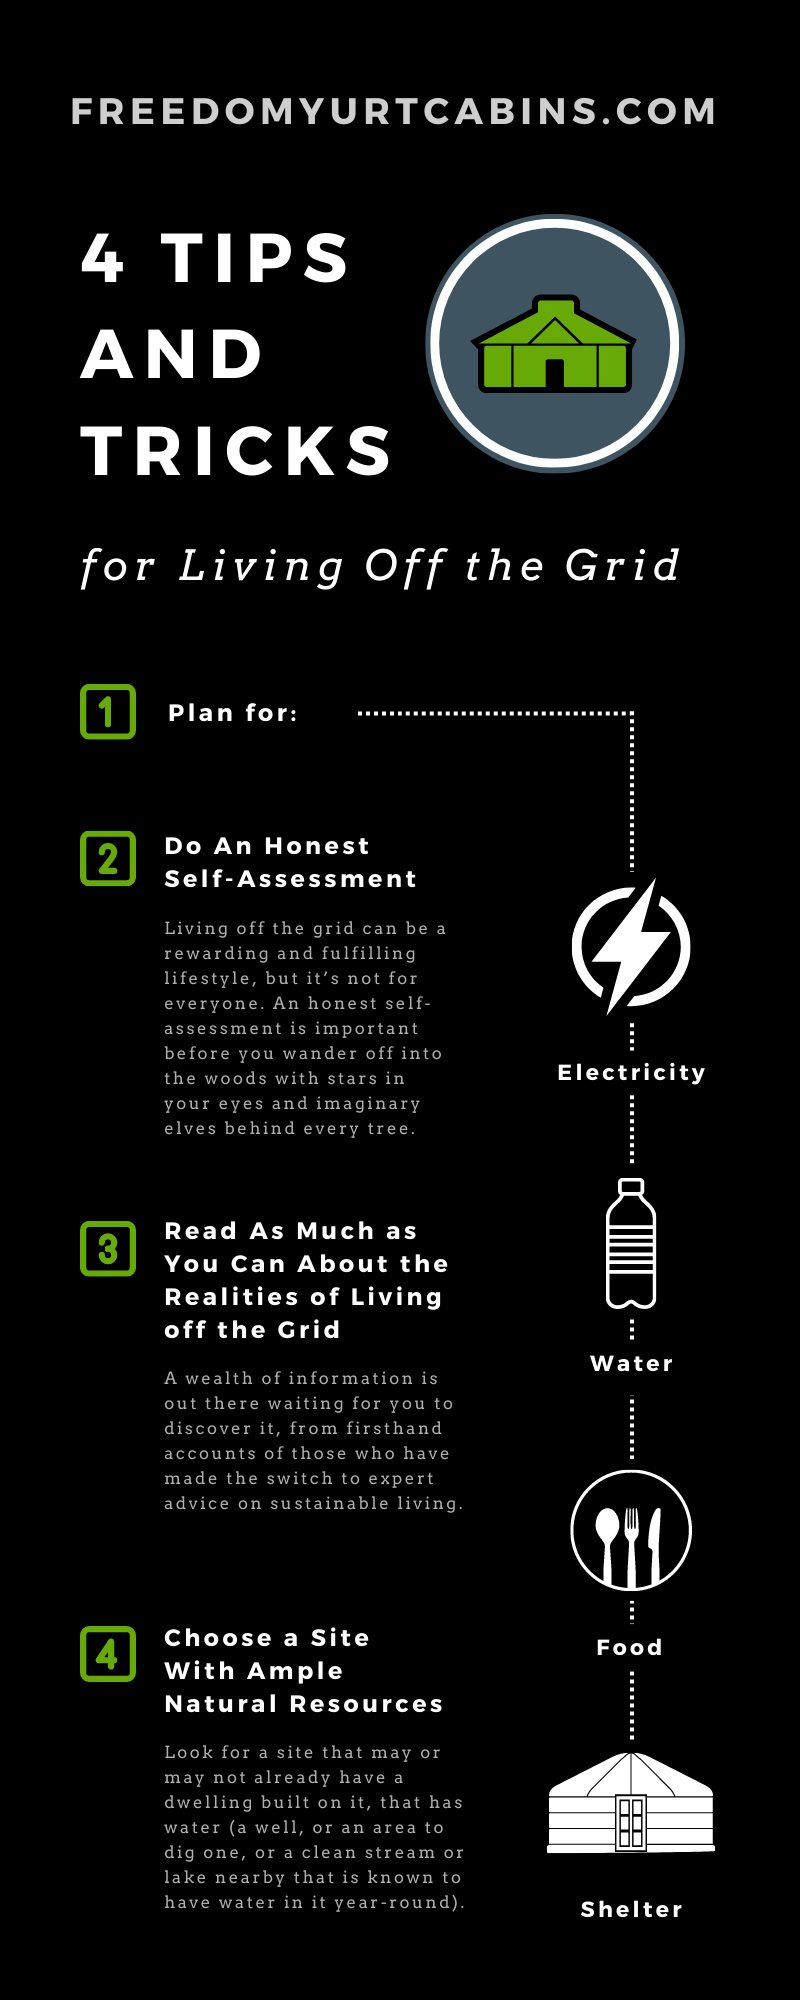 4 Tips and Tricks for Living Off the Grid